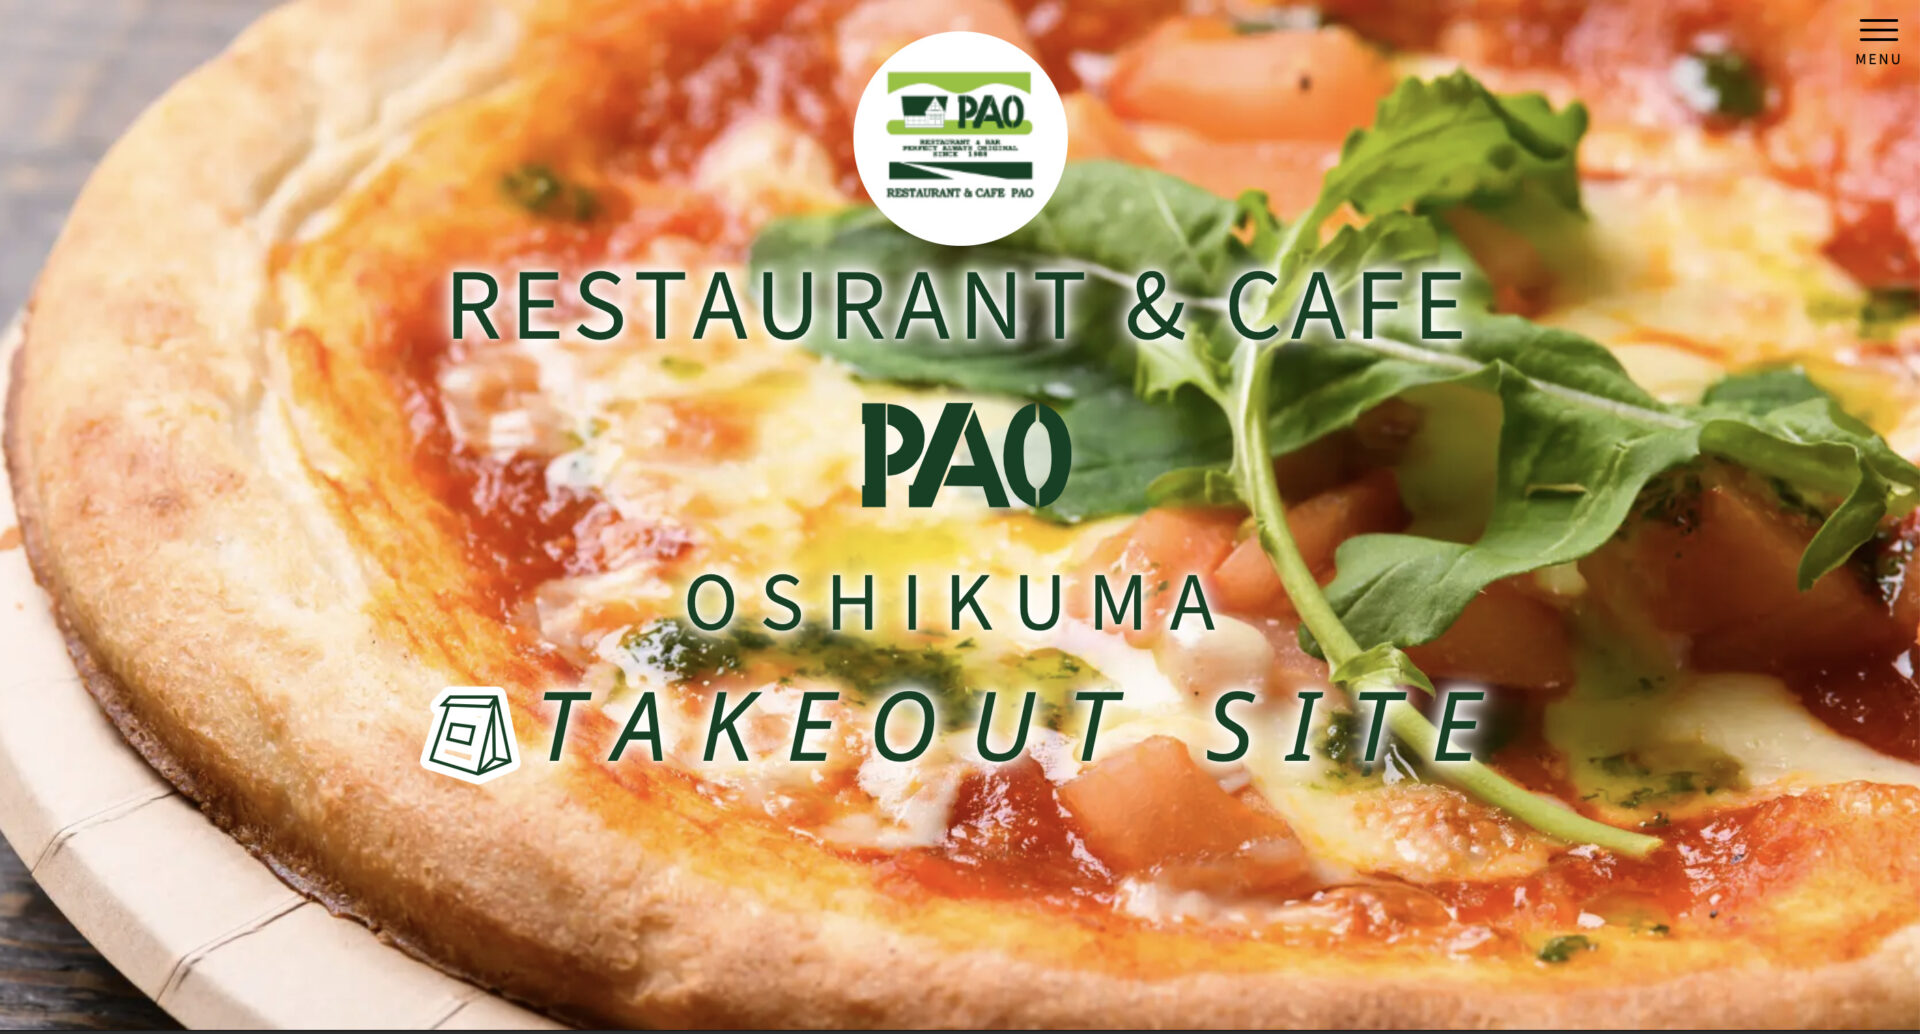 PAO押熊店 TAKE OUT SITE